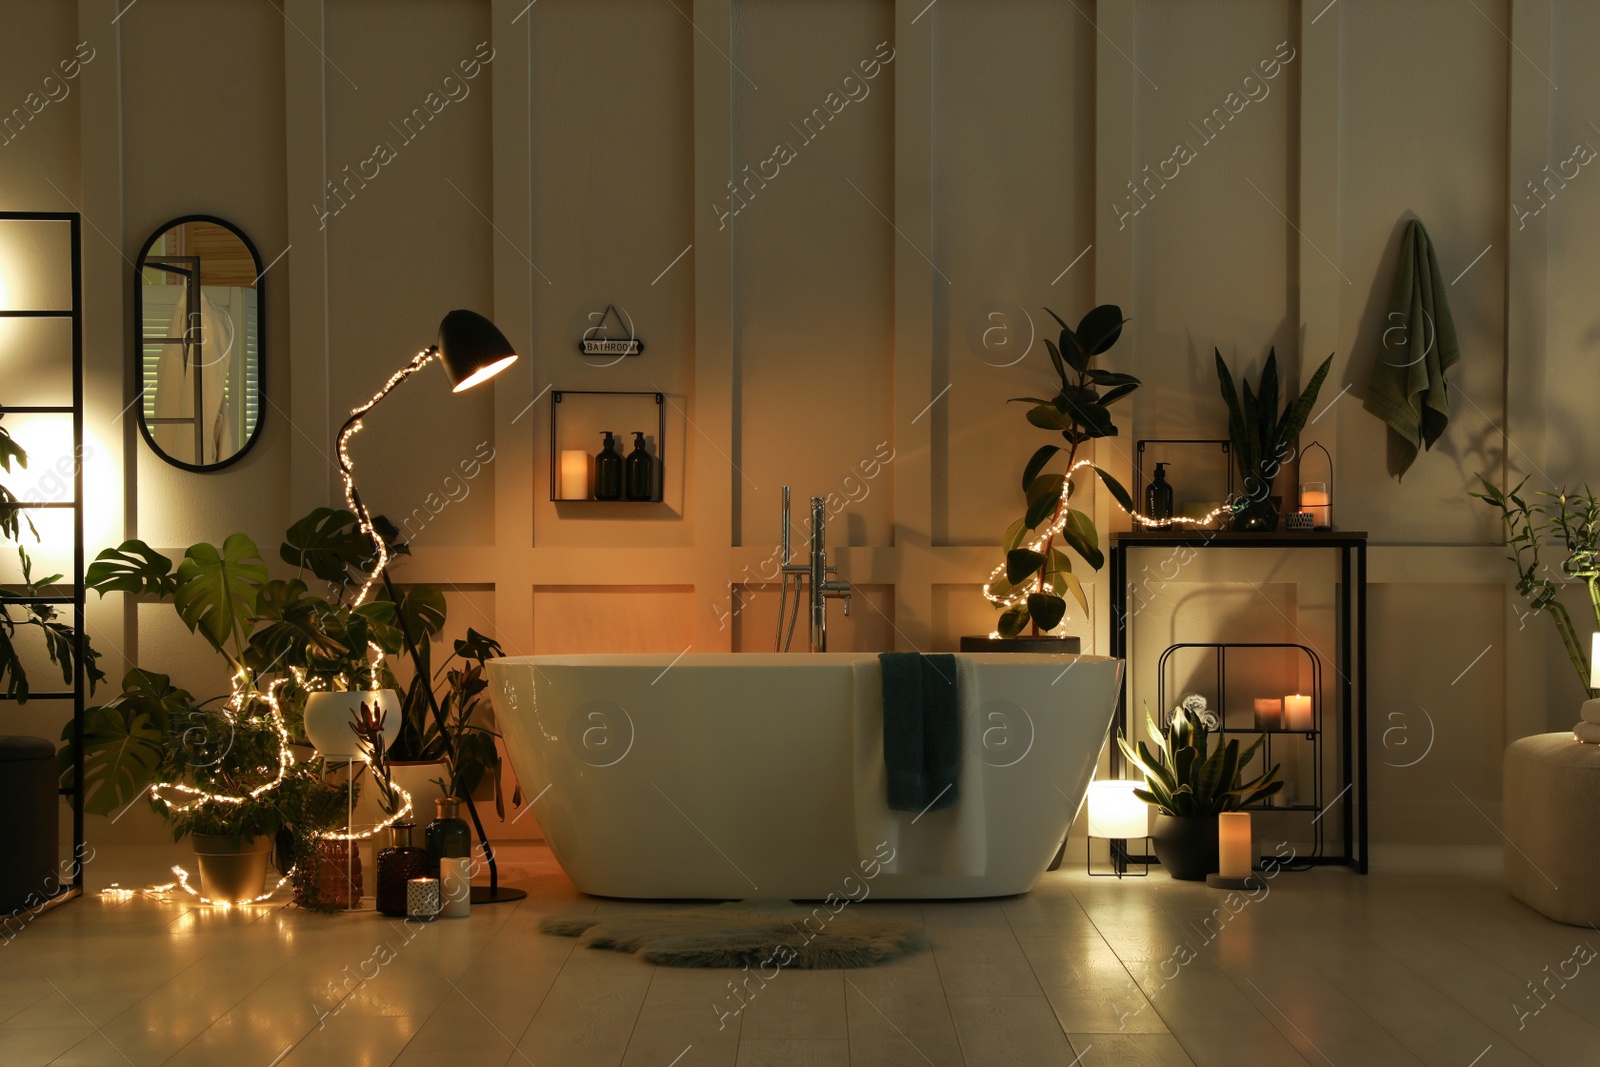 Photo of Stylish bathroom interior with houseplants and string lights. Home design